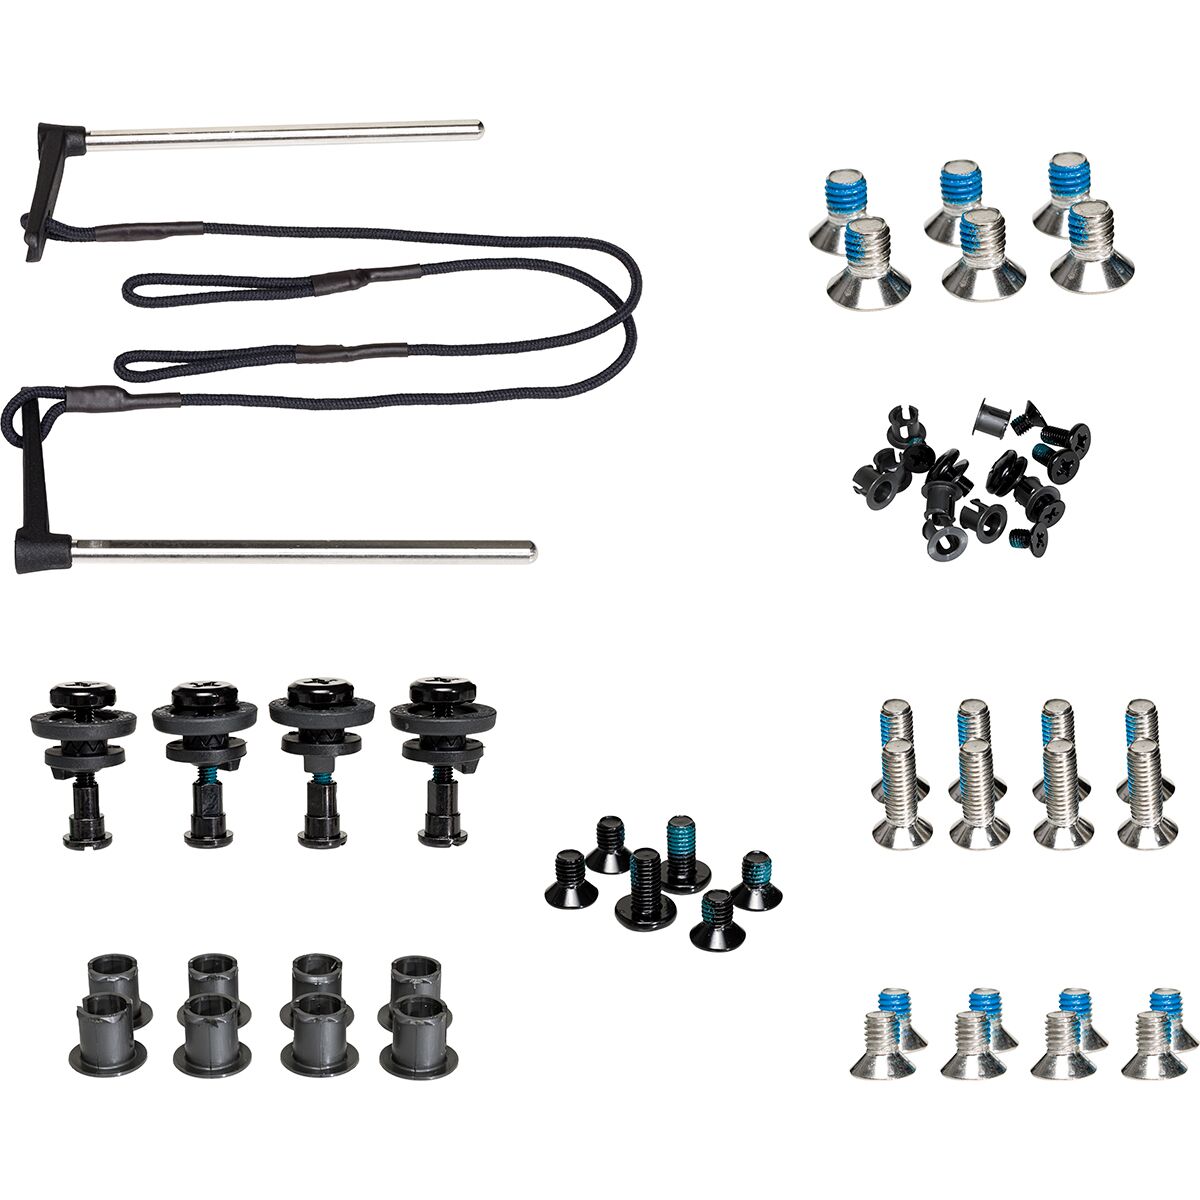 Union Expedition Emergency Parts Kit